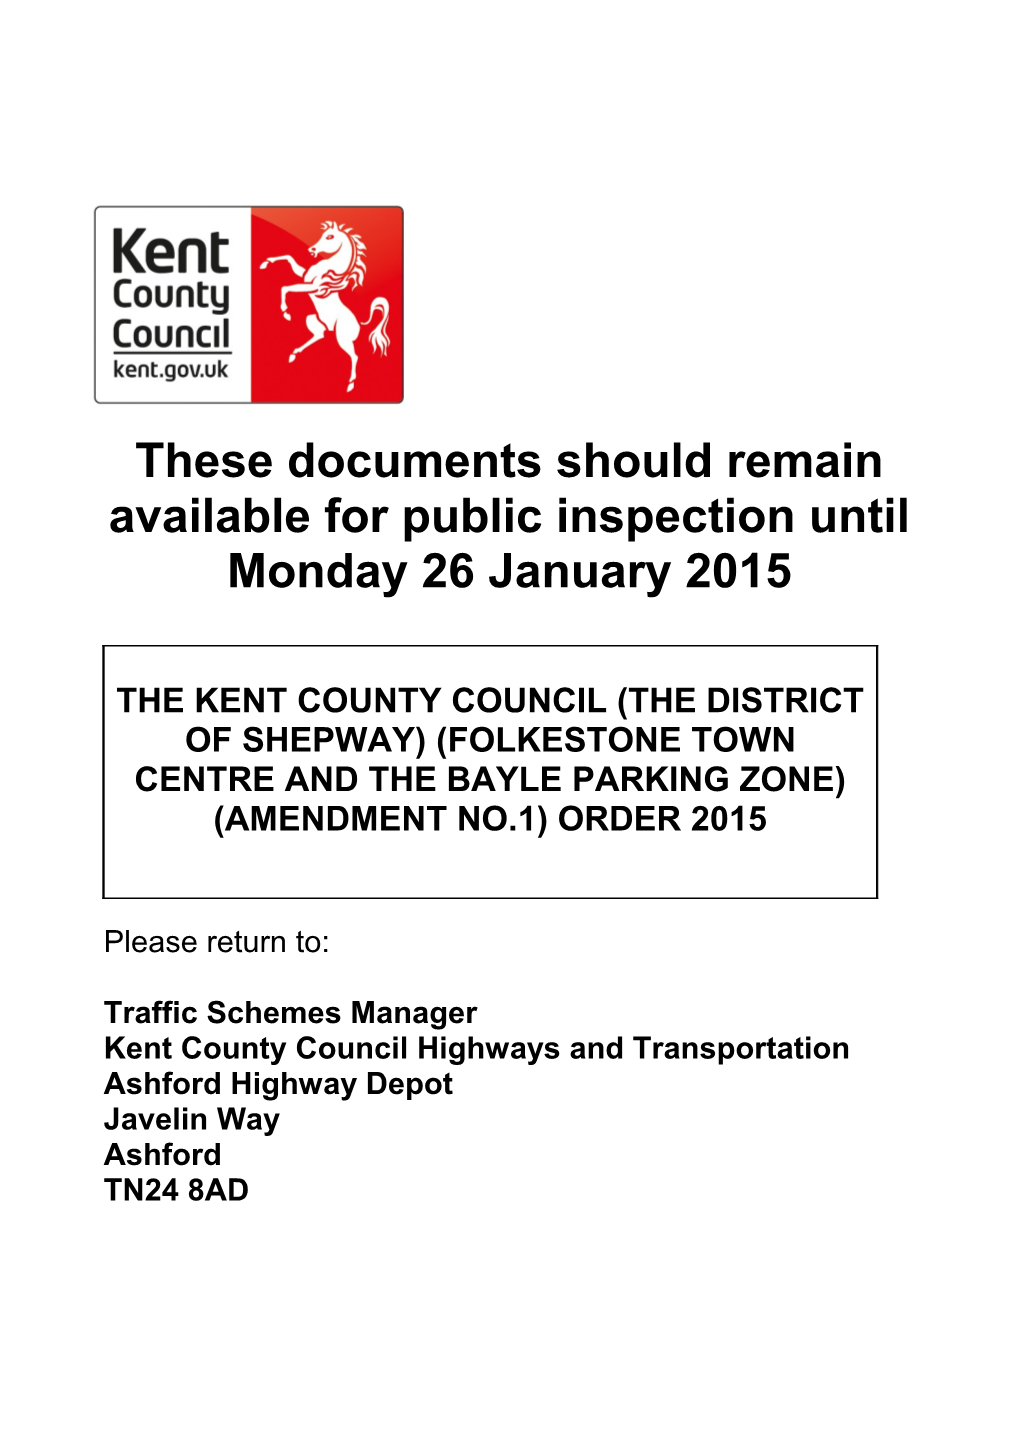 These Documents Should Remainavailable for Public Inspection Until Monday 26 January 2015